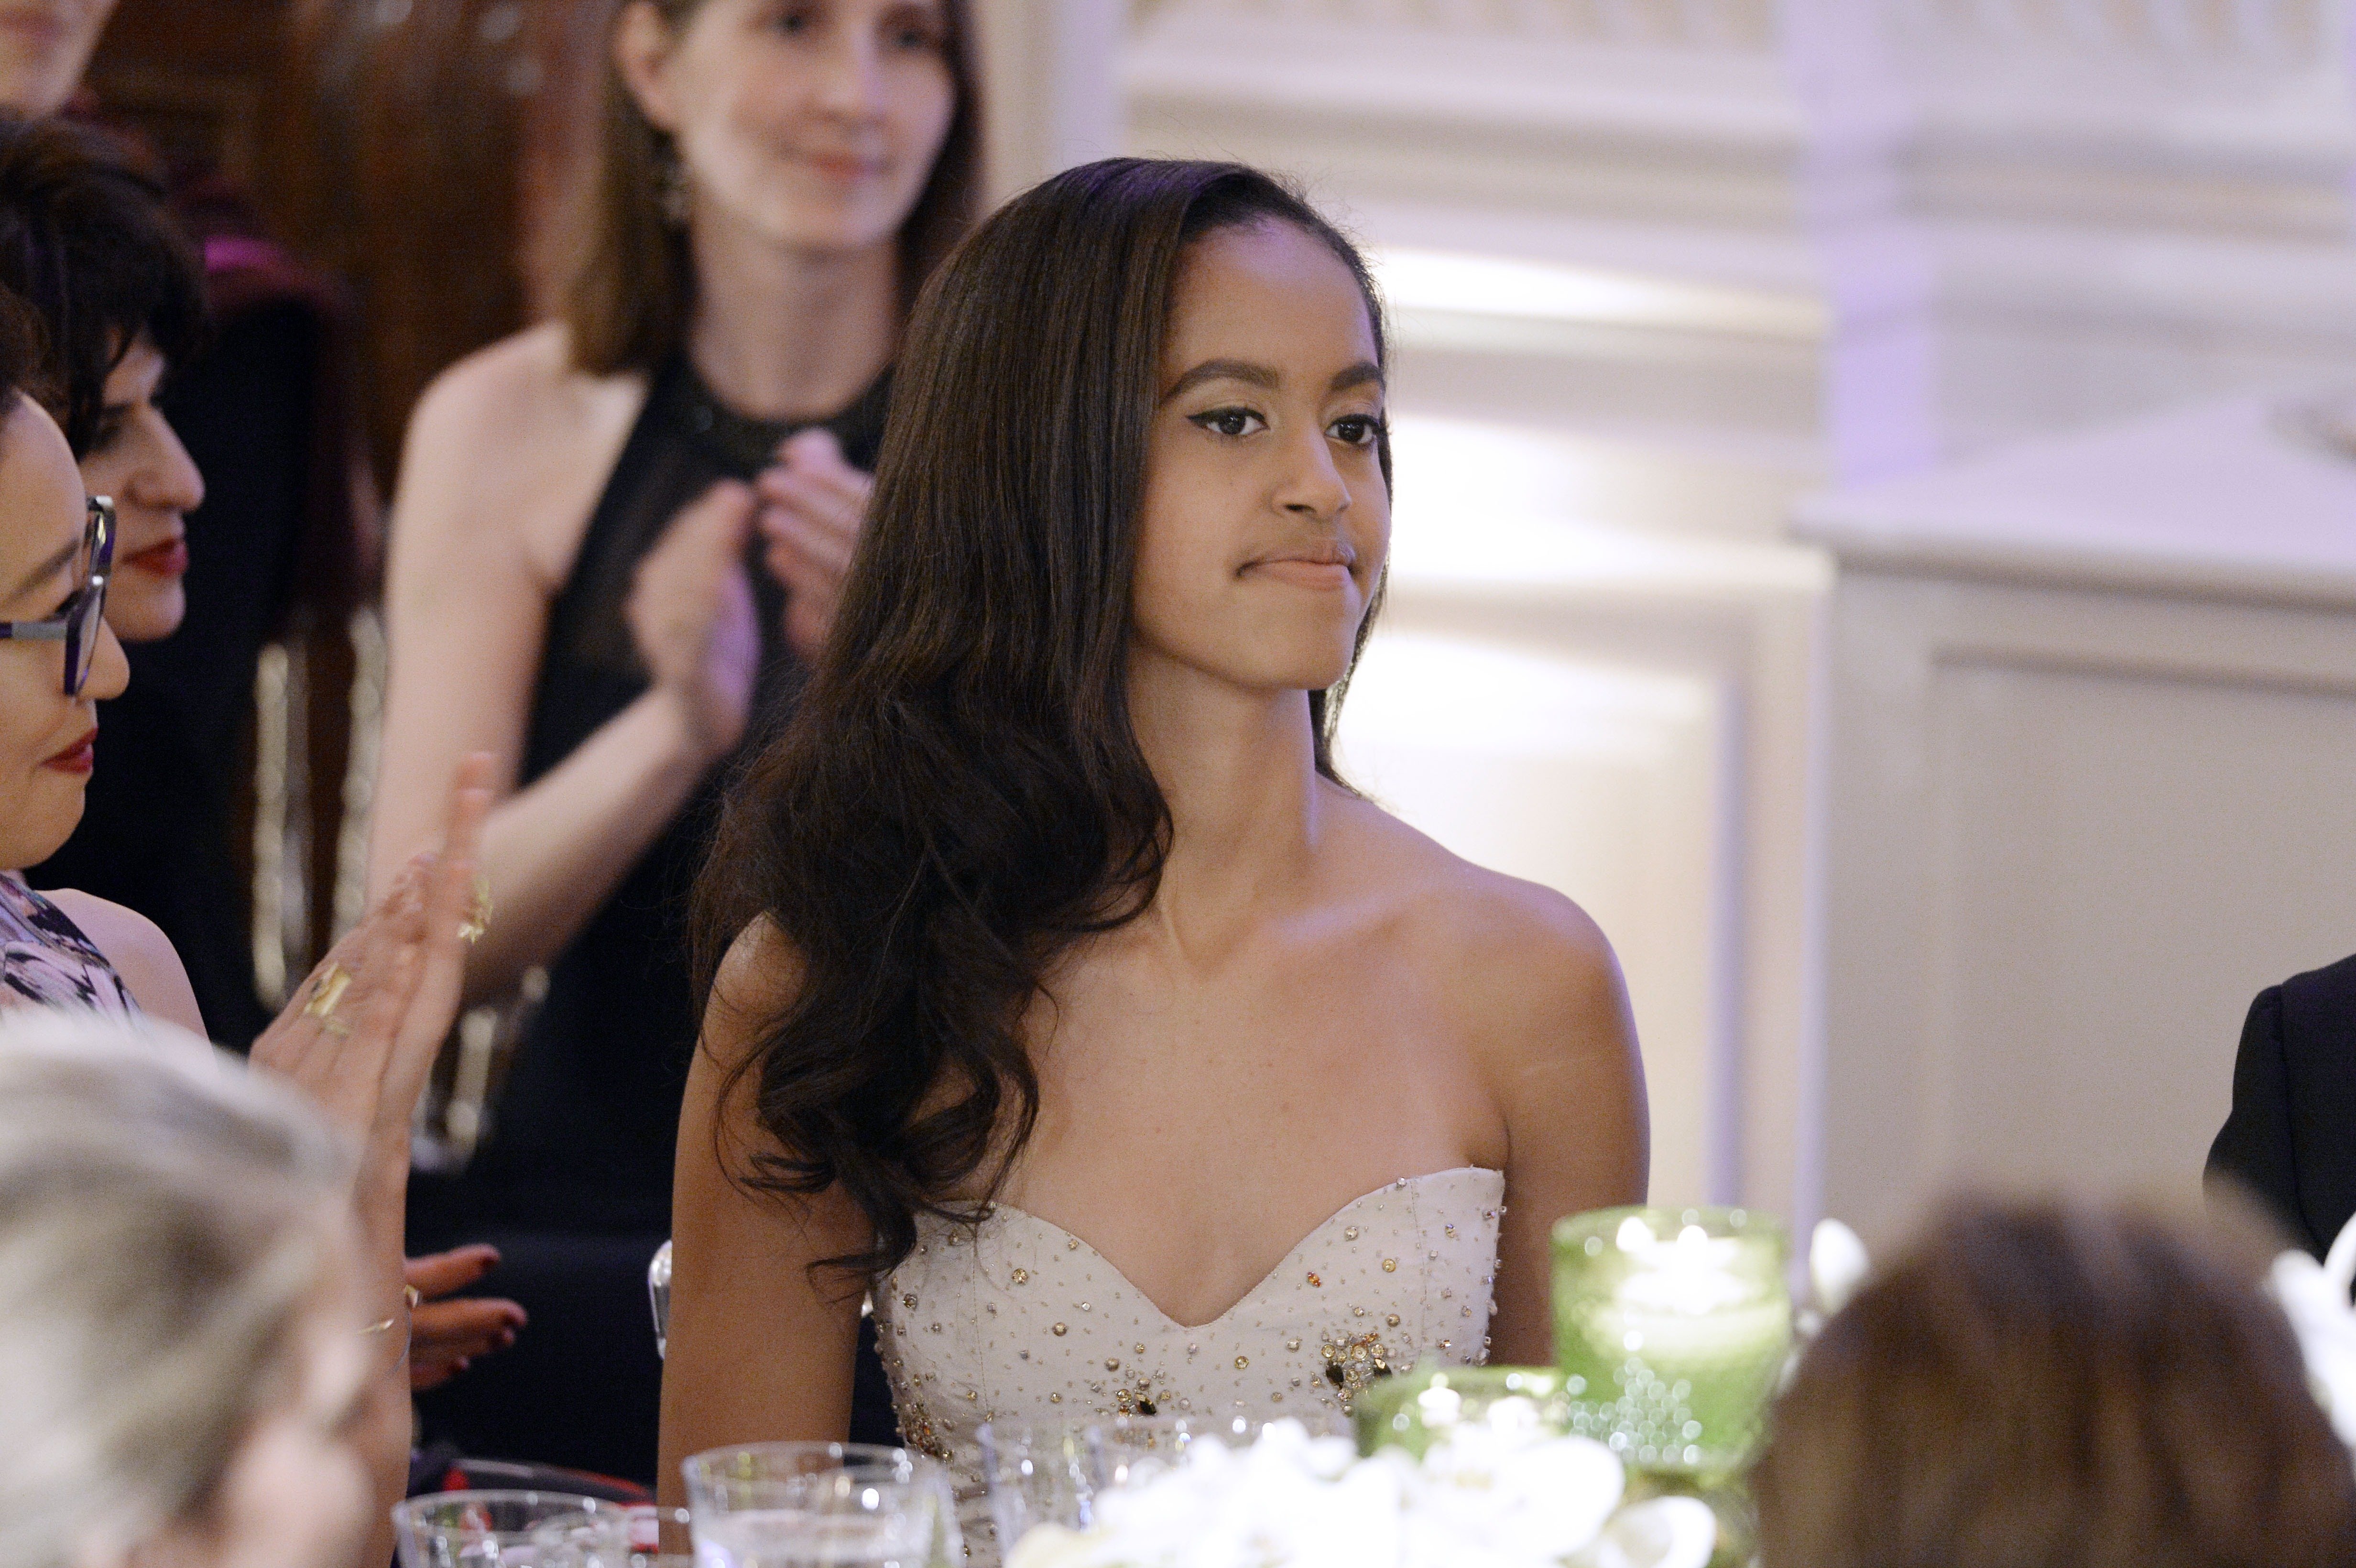 Malia Obama at a White House State Dinner on March 10, 2016 in Washington, D.C. | Photo: Getty Images